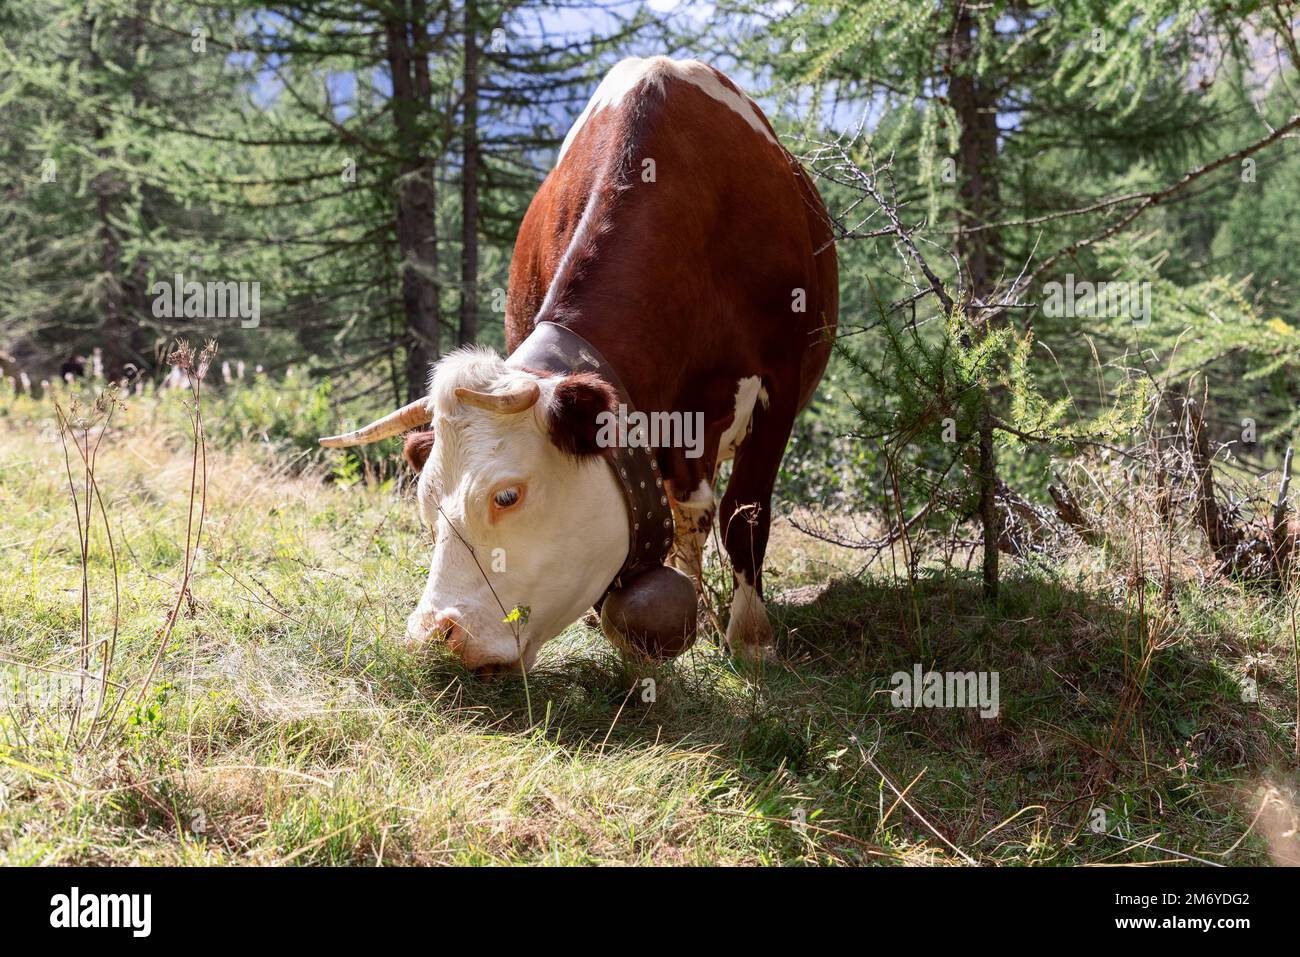 Adorable cow with brown skin and white eyelashes with large metal bell on wide leather strap around her neck nibbles oon a mountain meadow Stock Photo